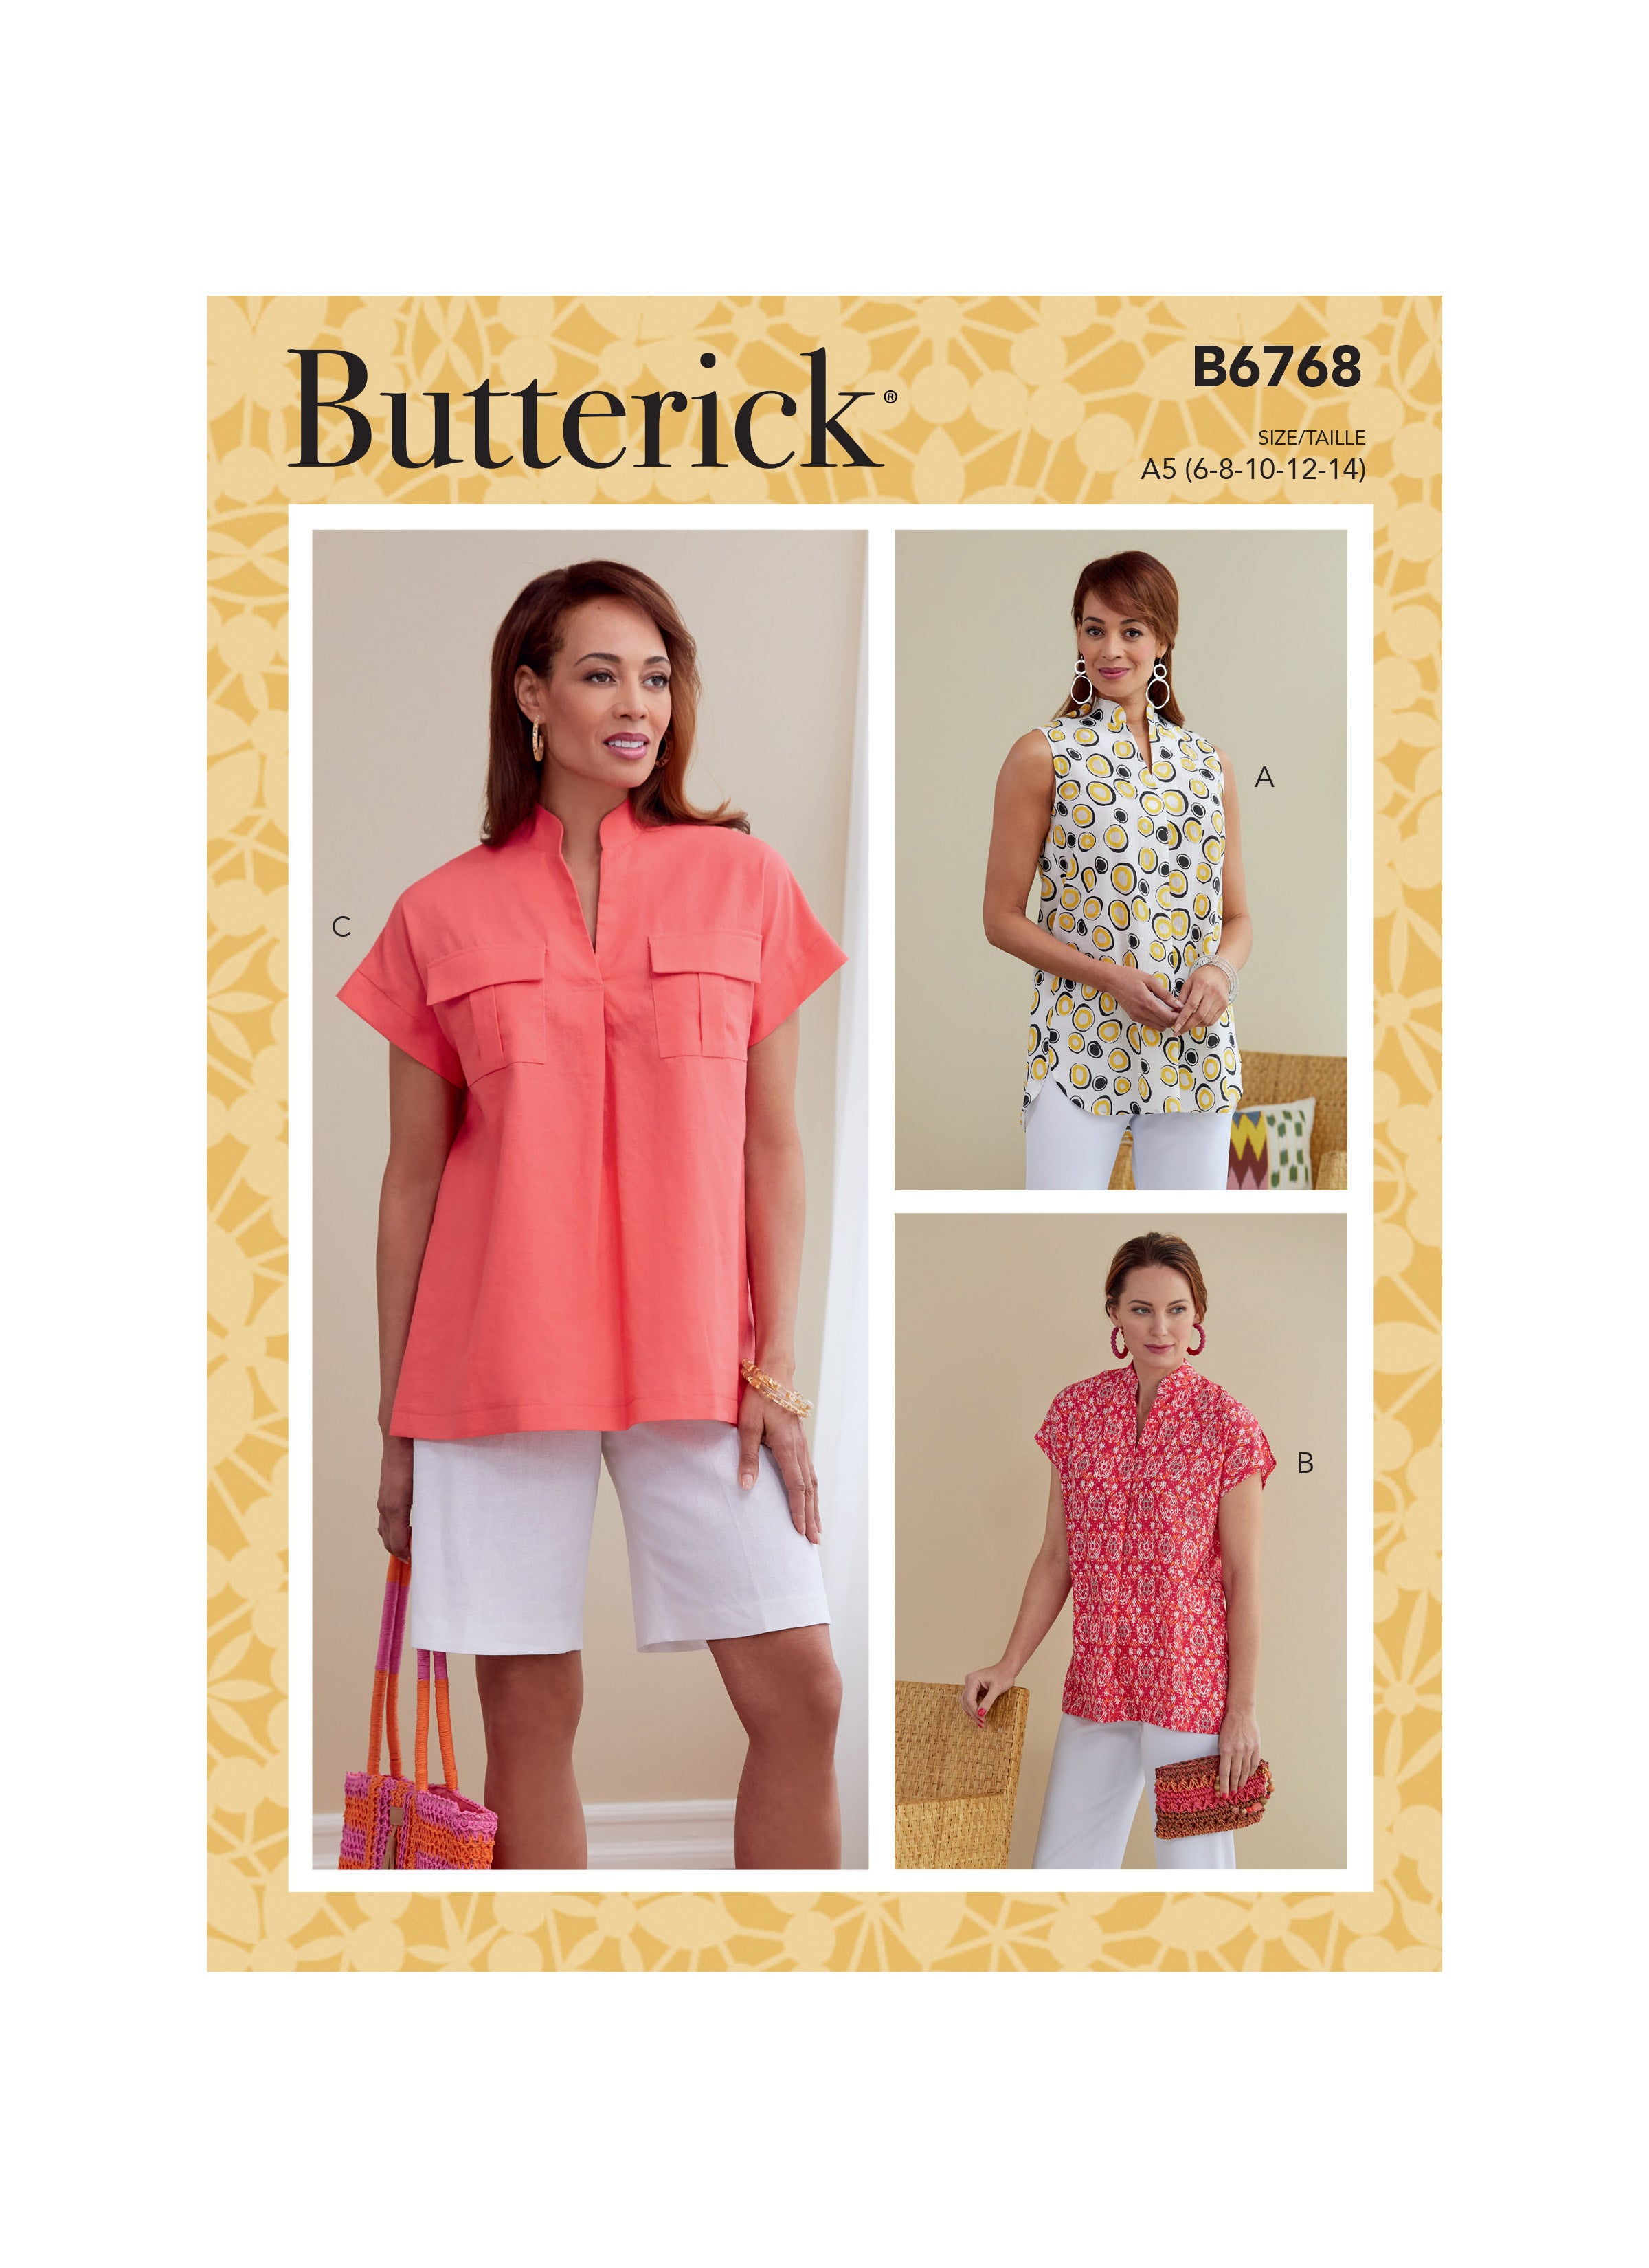 Butterick sewing pattern 6768 Misses' Top from Jaycotts Sewing Supplies